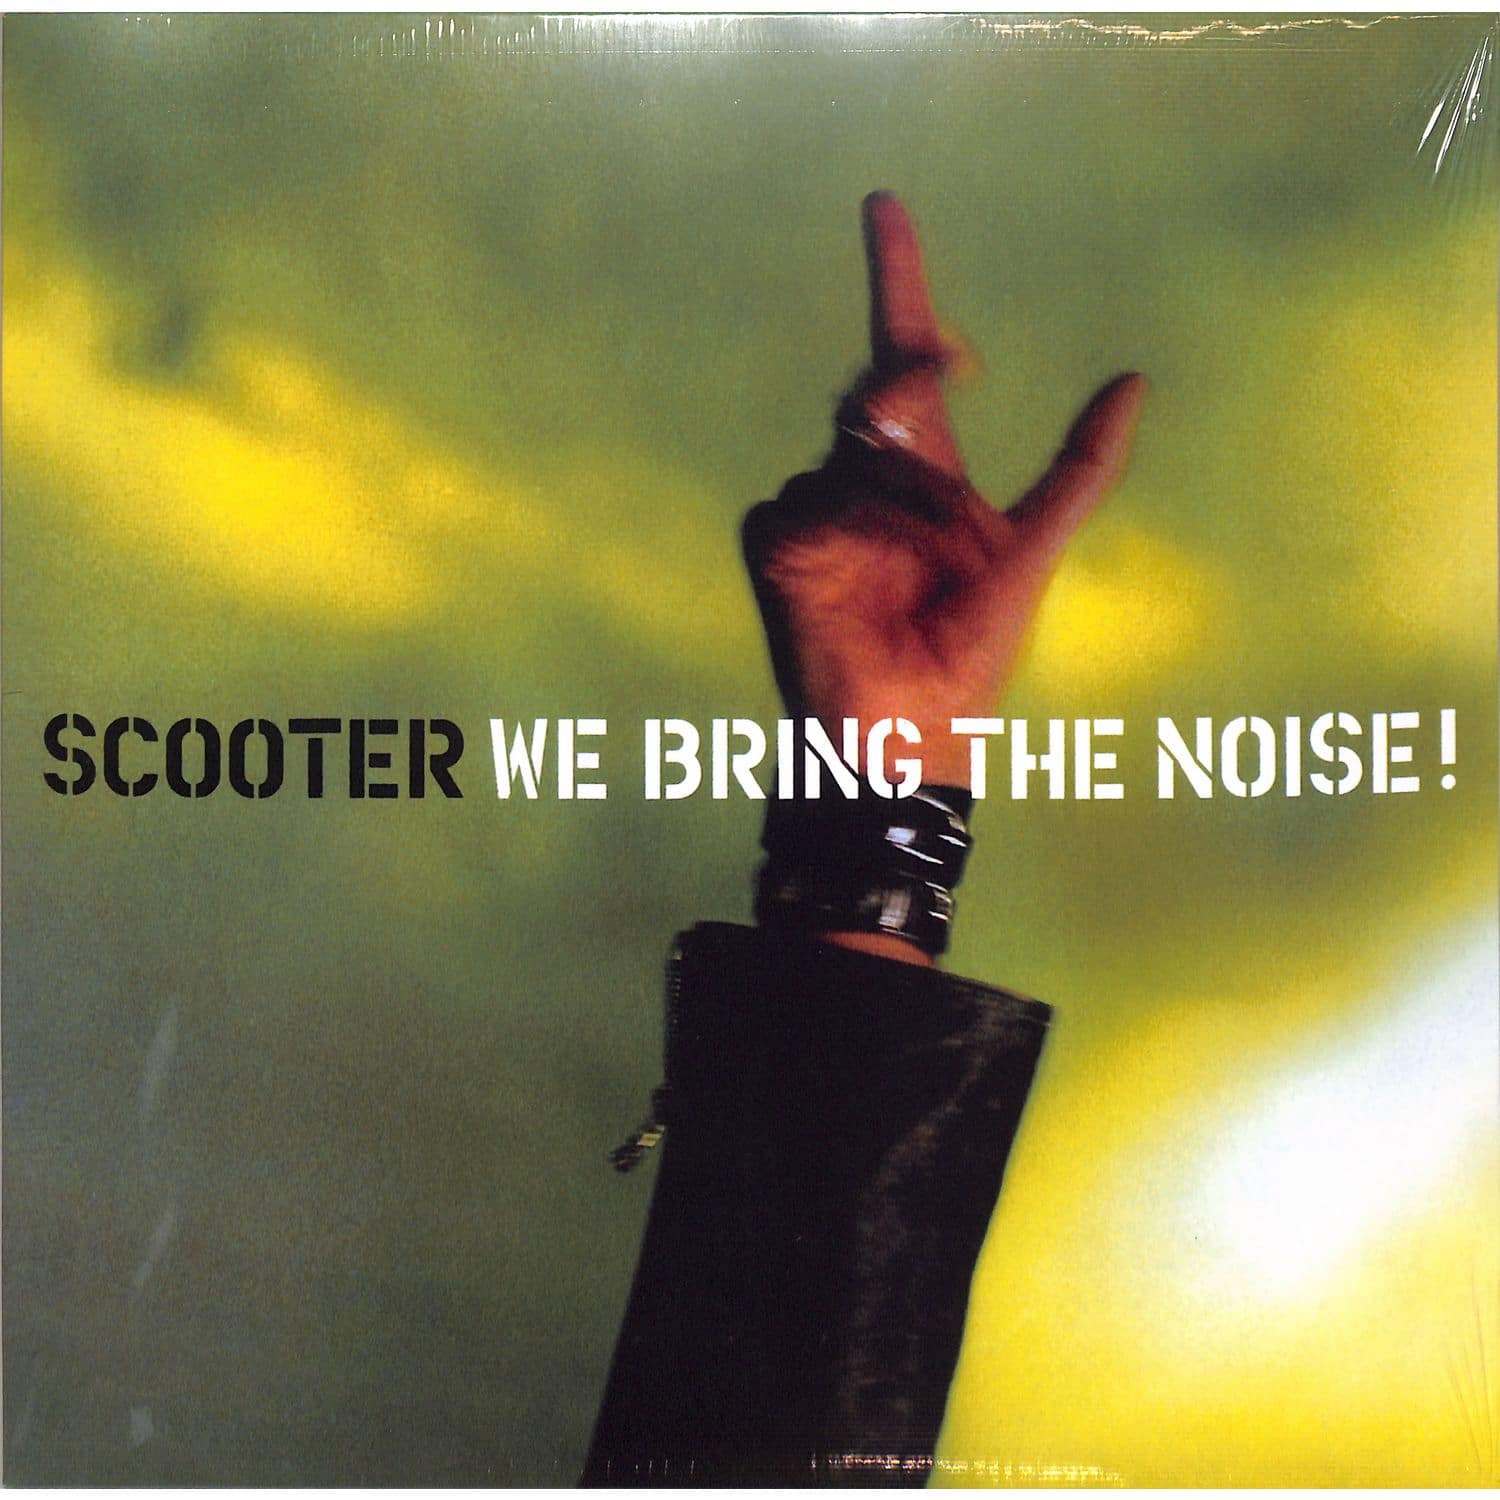 Scooter - WE BRING THE NOISE! 